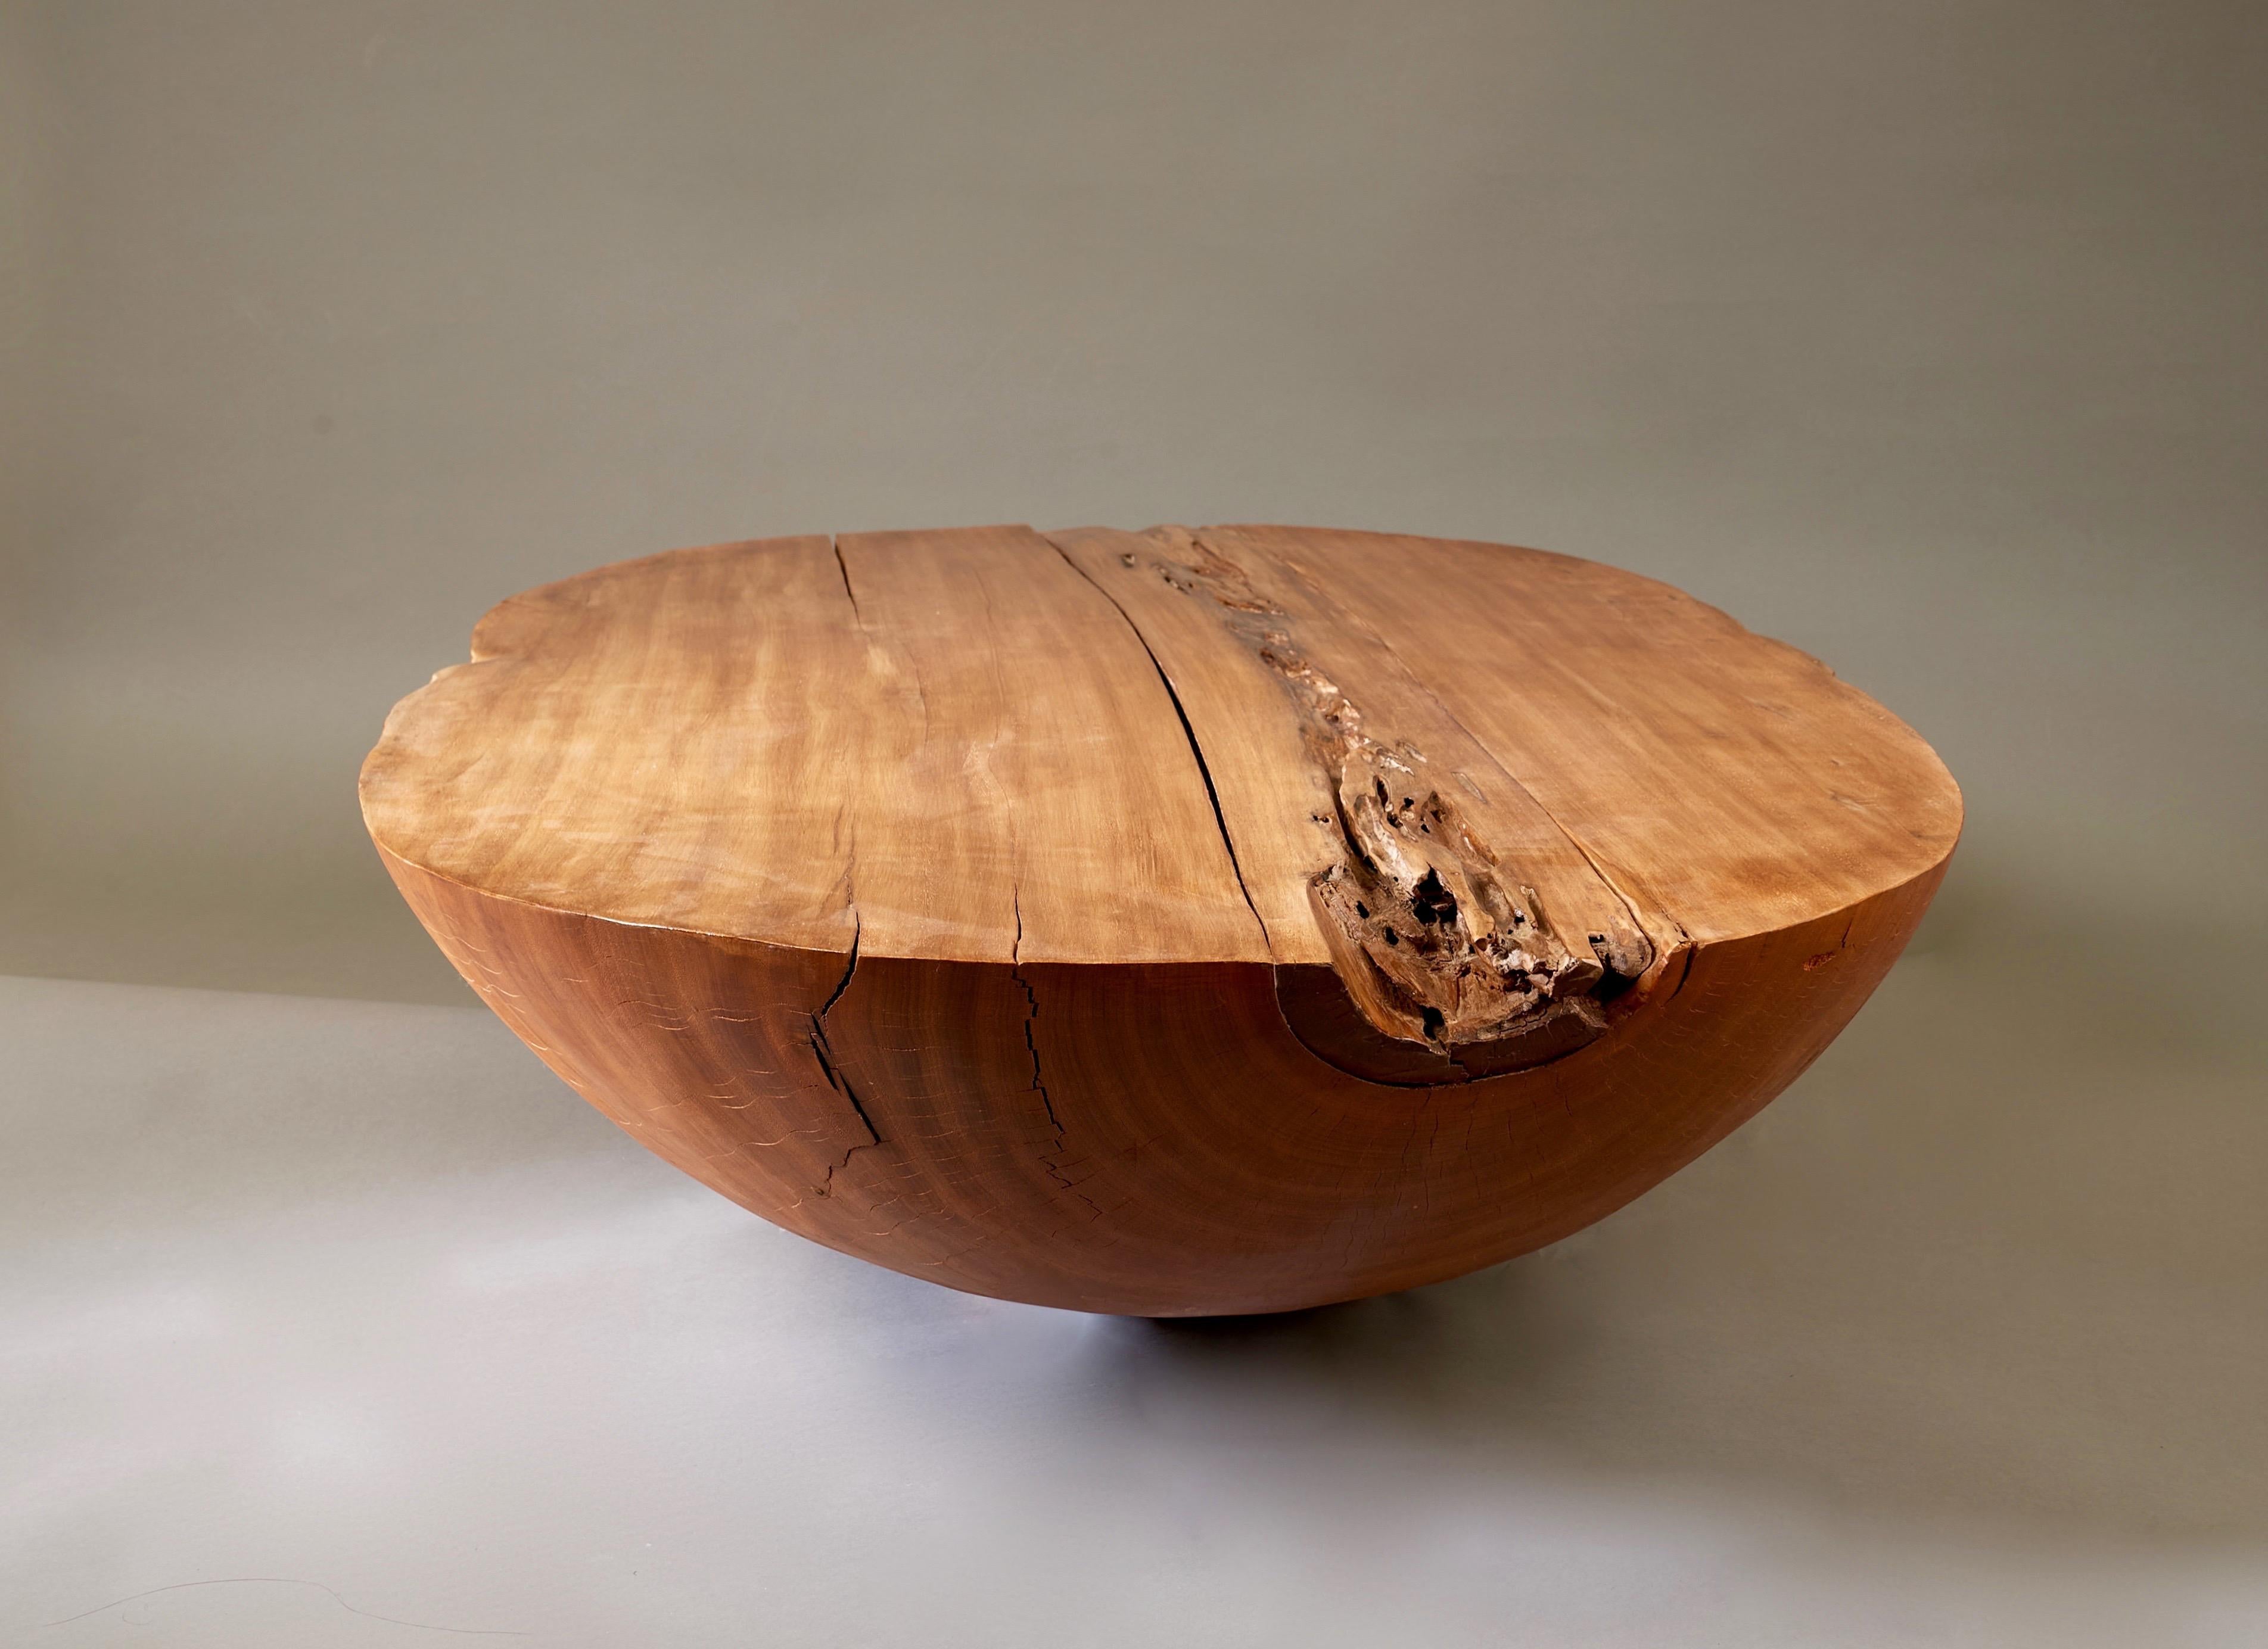 Contemporary Hugo Franca, Unique Monumental Coffee Table in Reclaimed Pequi Wood, Brazil 2005